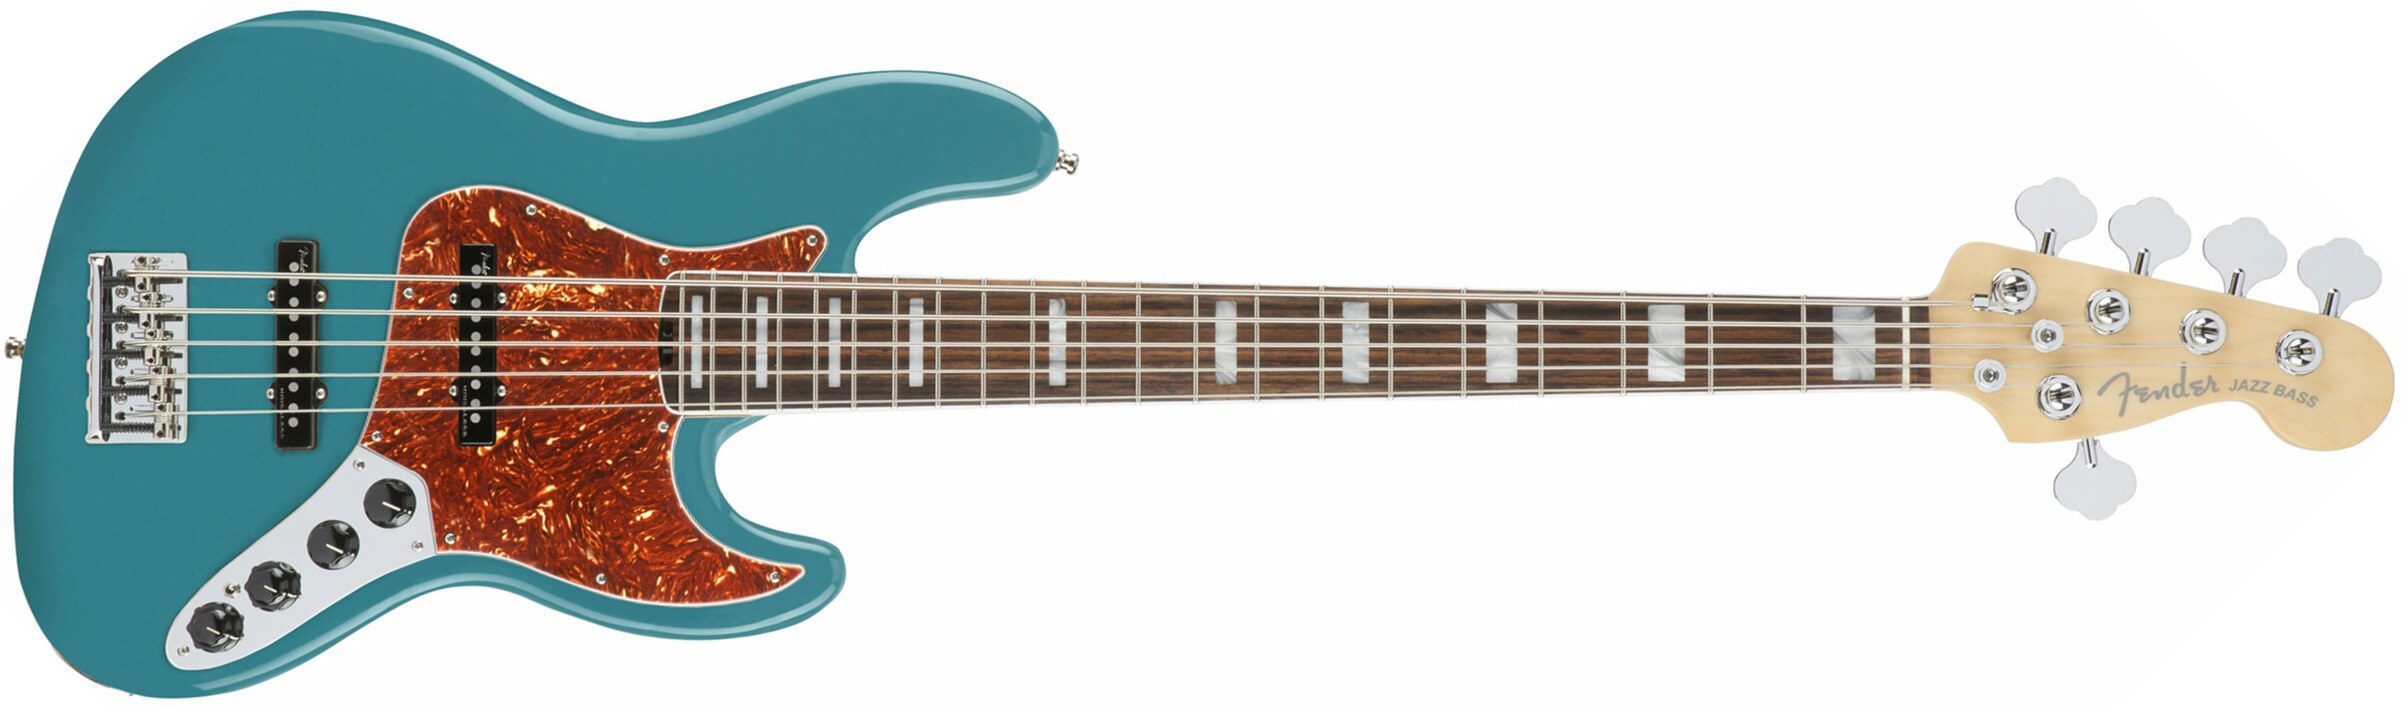 Fender American Elite Jazz Bass V Usa Eb - Ocean Turquoise - Solidbody E-bass - Main picture